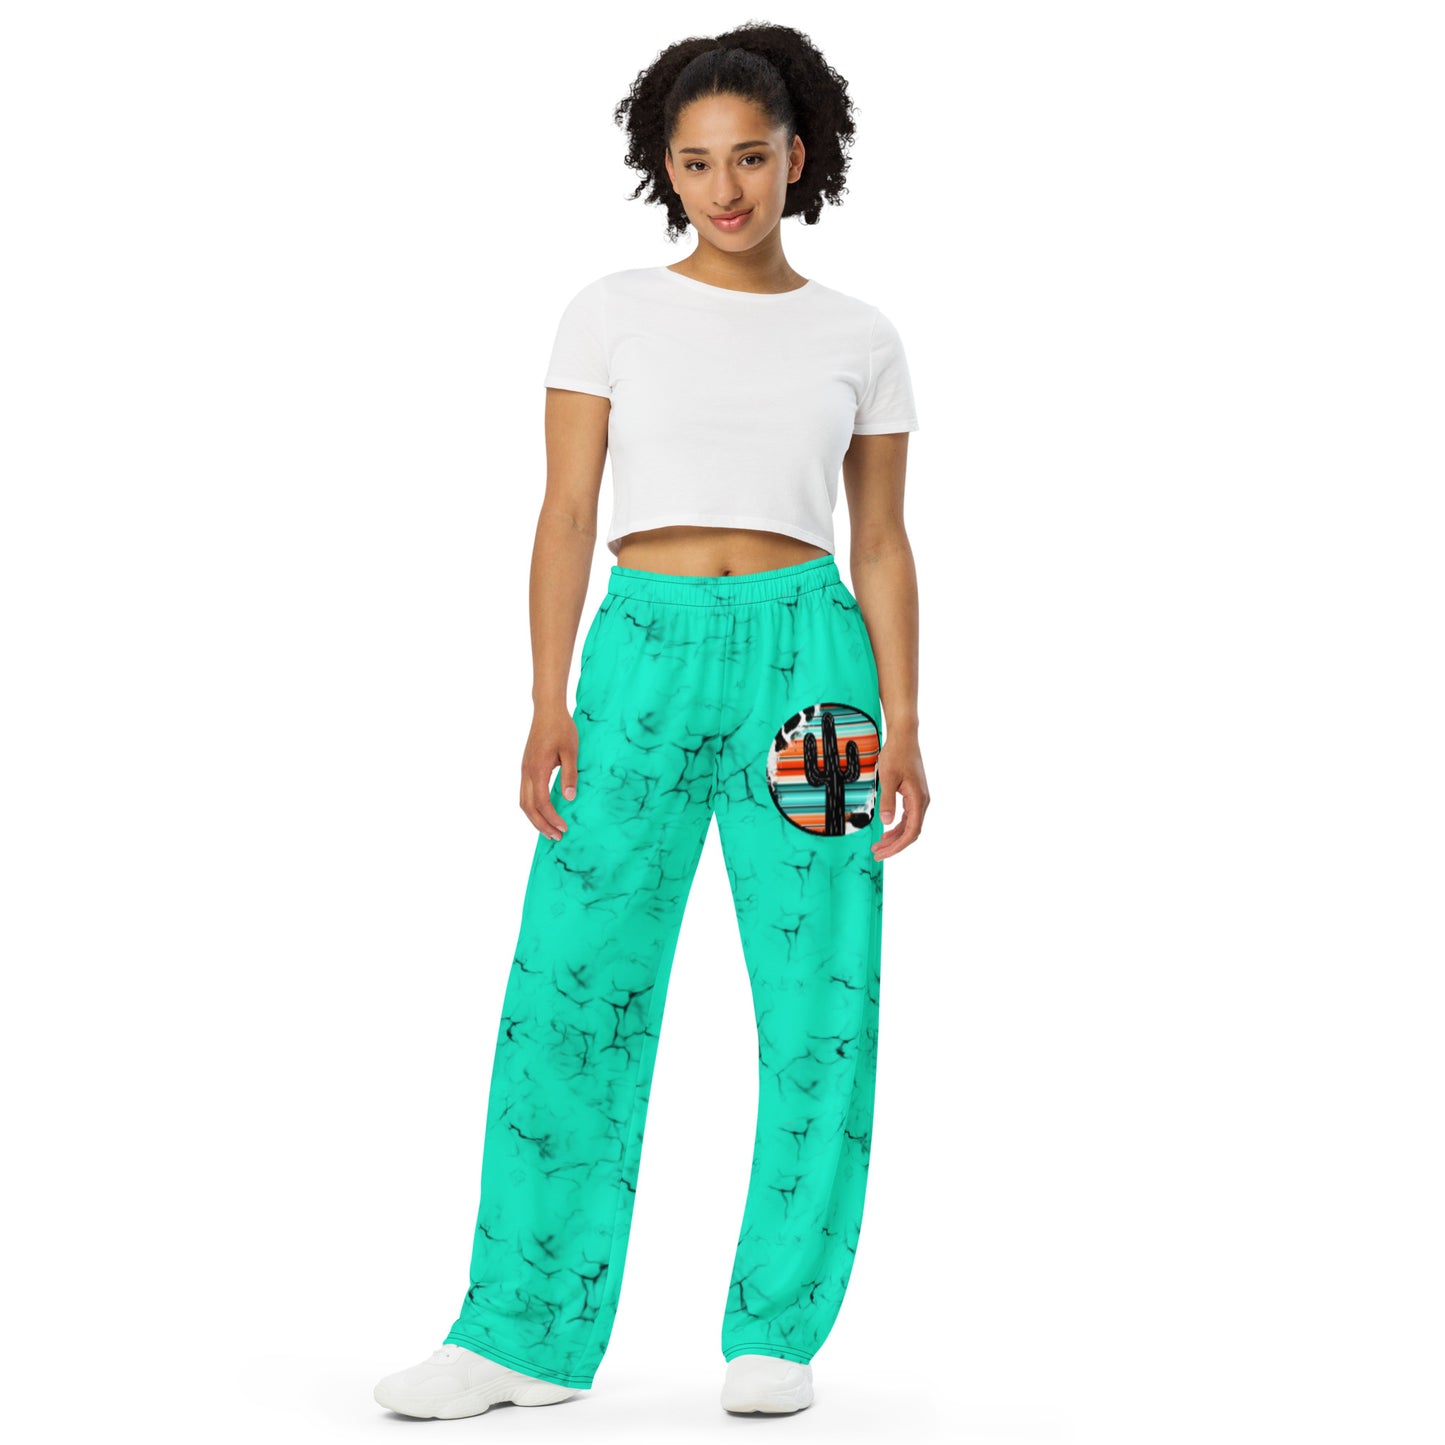 Turquoise Cactus - All-over print unisex wide-leg pants